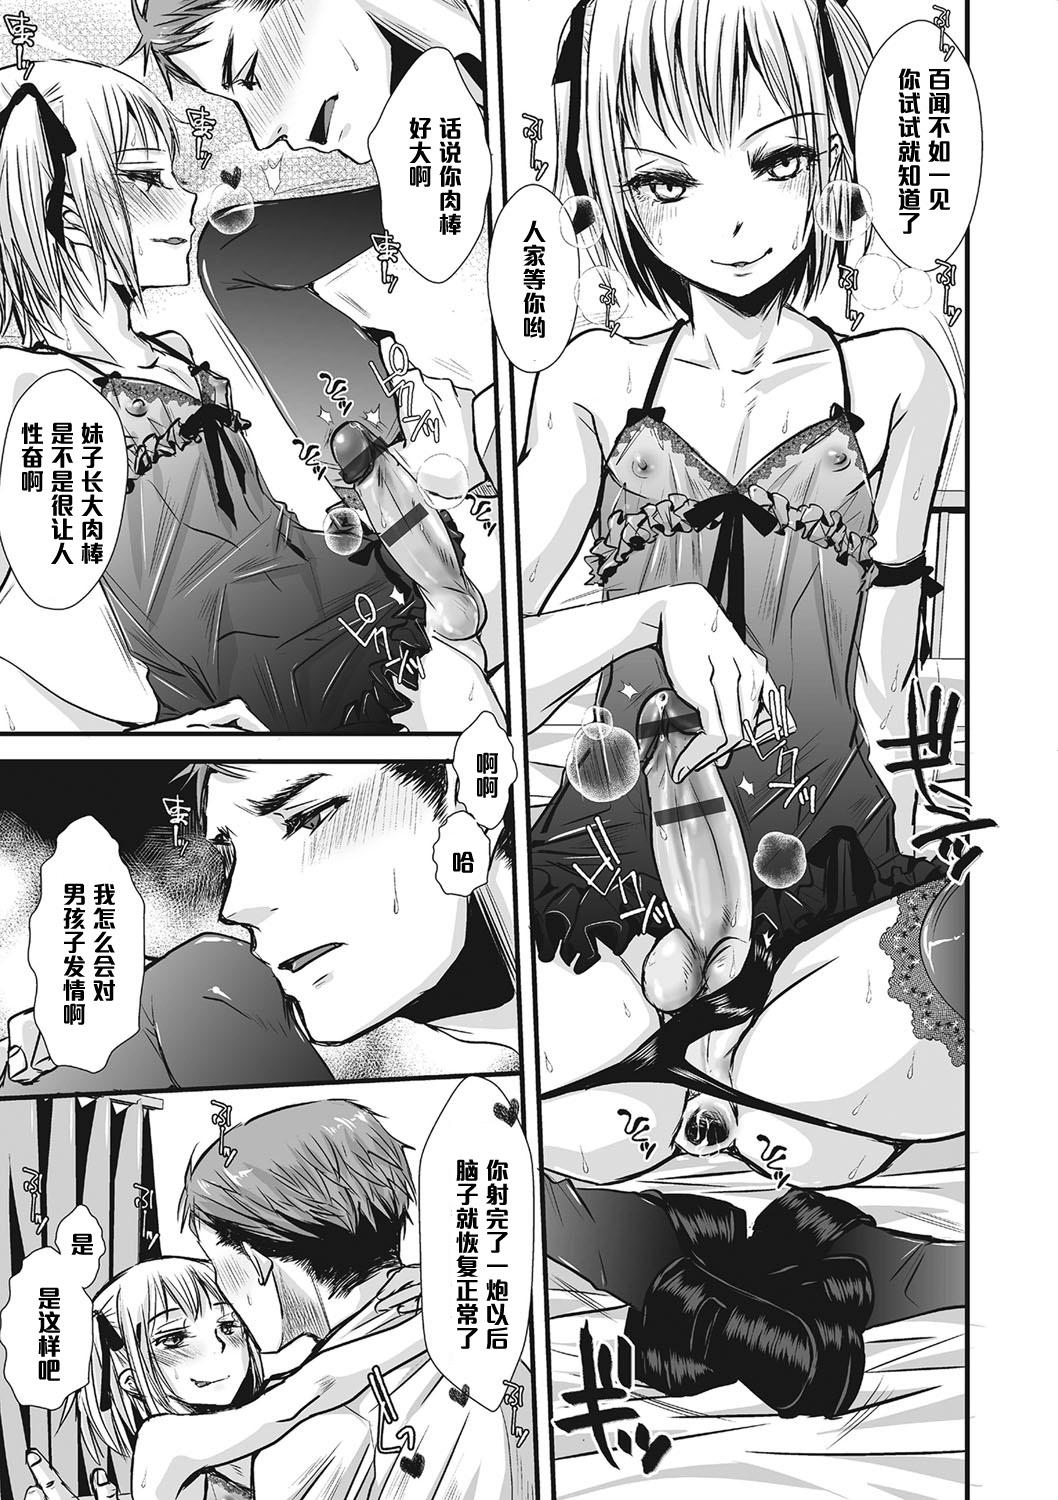 Workout Shounen Immoral 6 Camgirl - Page 7